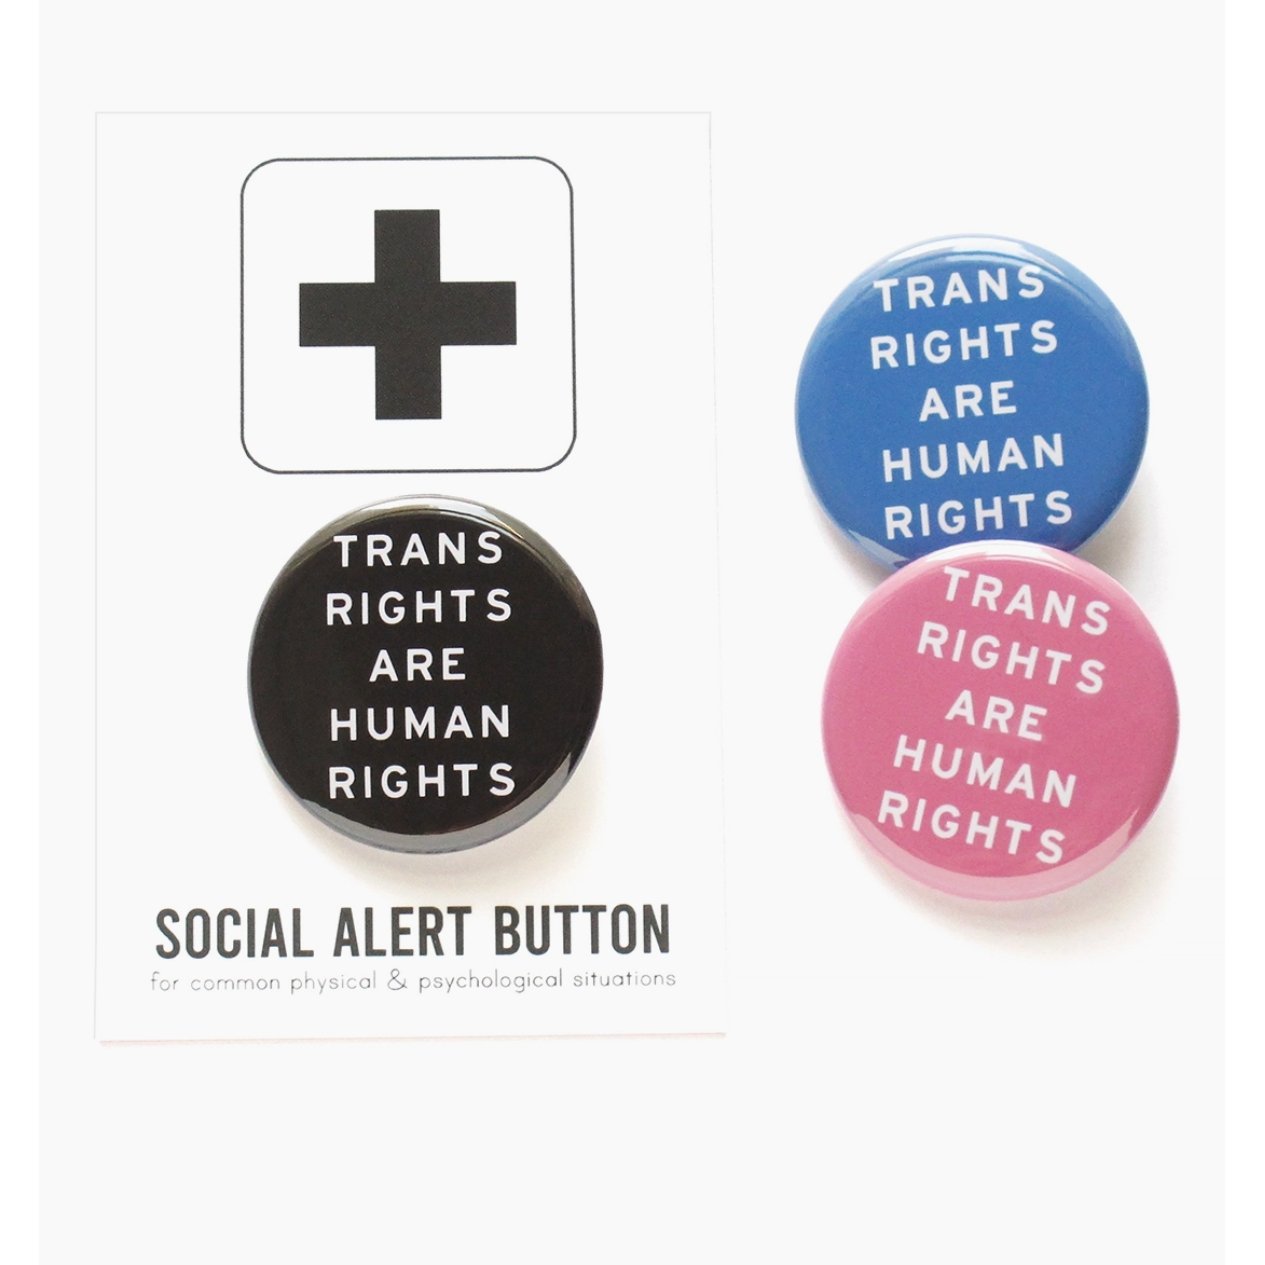 Trans Rights are Human Rights Button in Black and White